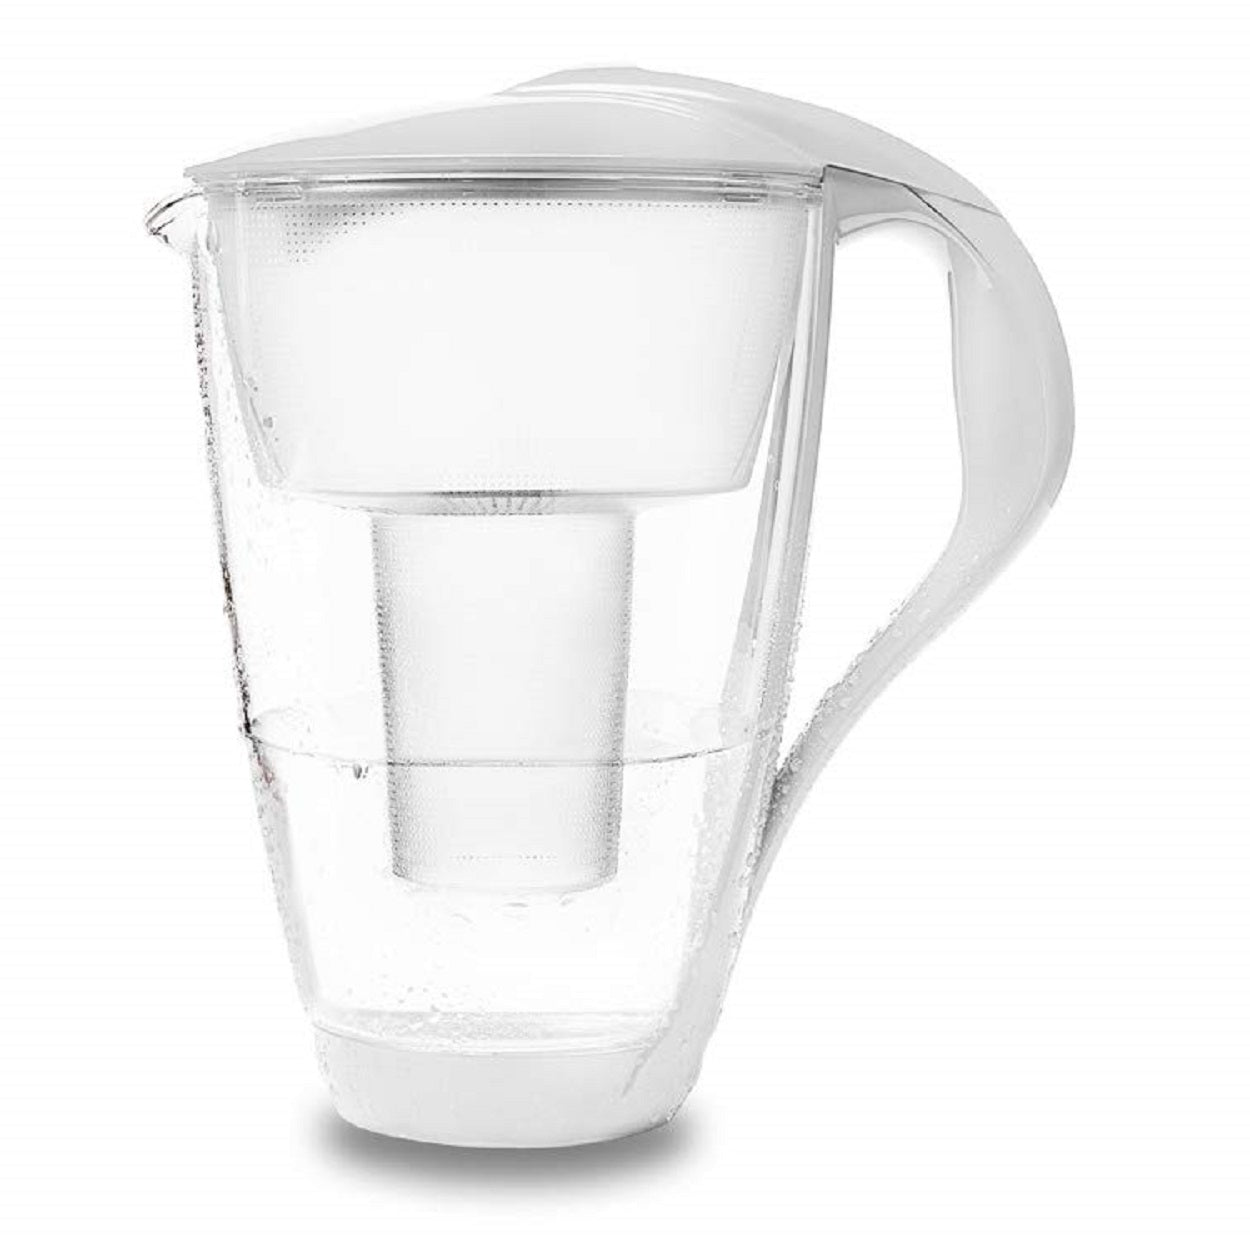 PearlCo Water Filter Jug Glass LED CLASSIC 2 Litre - White